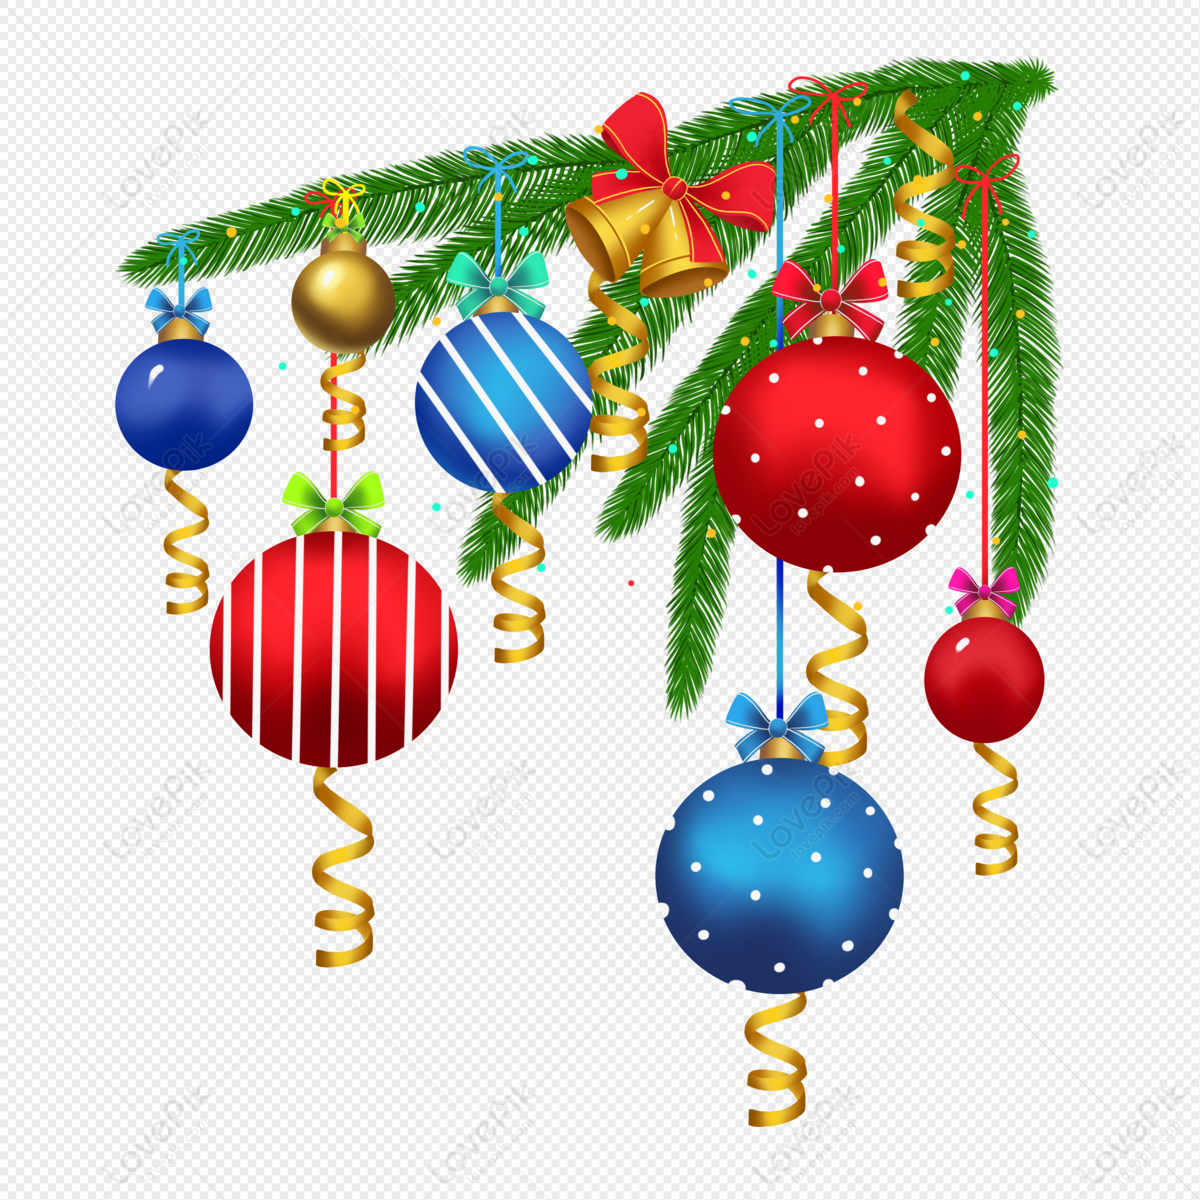 Cartoon Christmas Ornaments Decorated PNG, Clipart, Ball, Cartoon, Cartoon  Christmas, Cartoon Christmas Ornaments, Cartoon Clipart Free